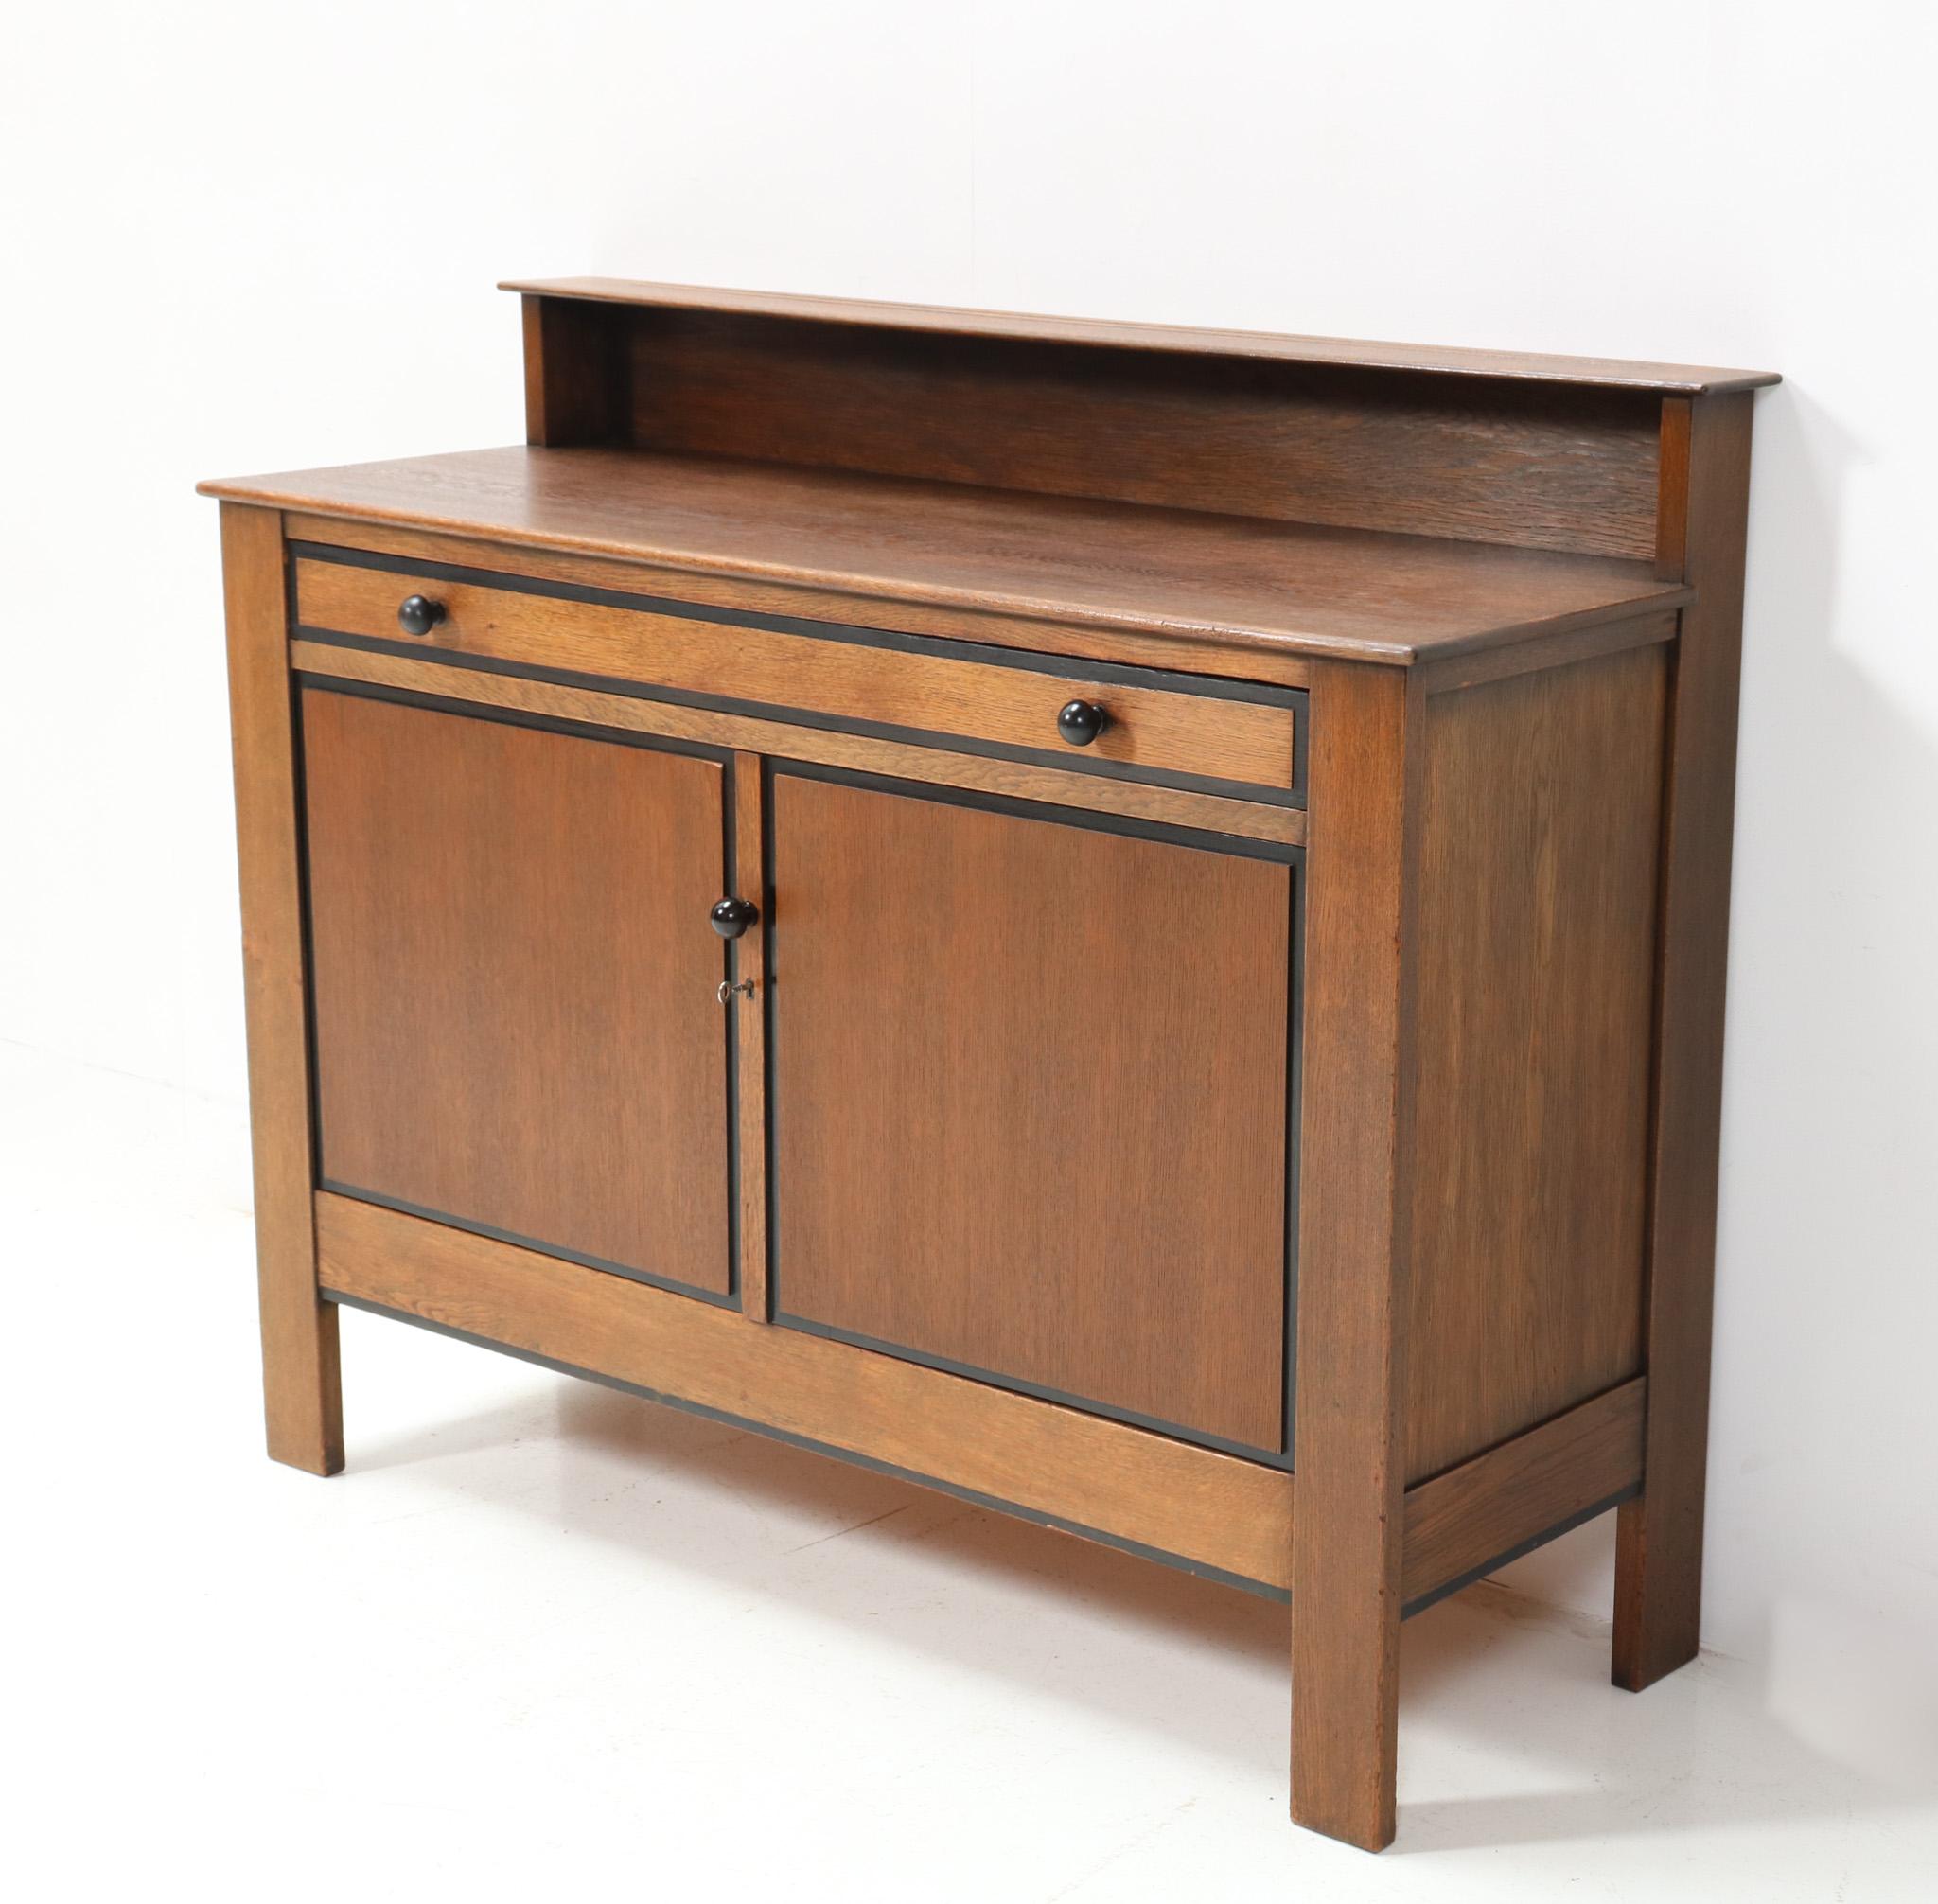 Early 20th Century Oak Art Deco Modernist Credenza by J.A. Muntendam for L.O.V. Oosterbeek, 1920s For Sale